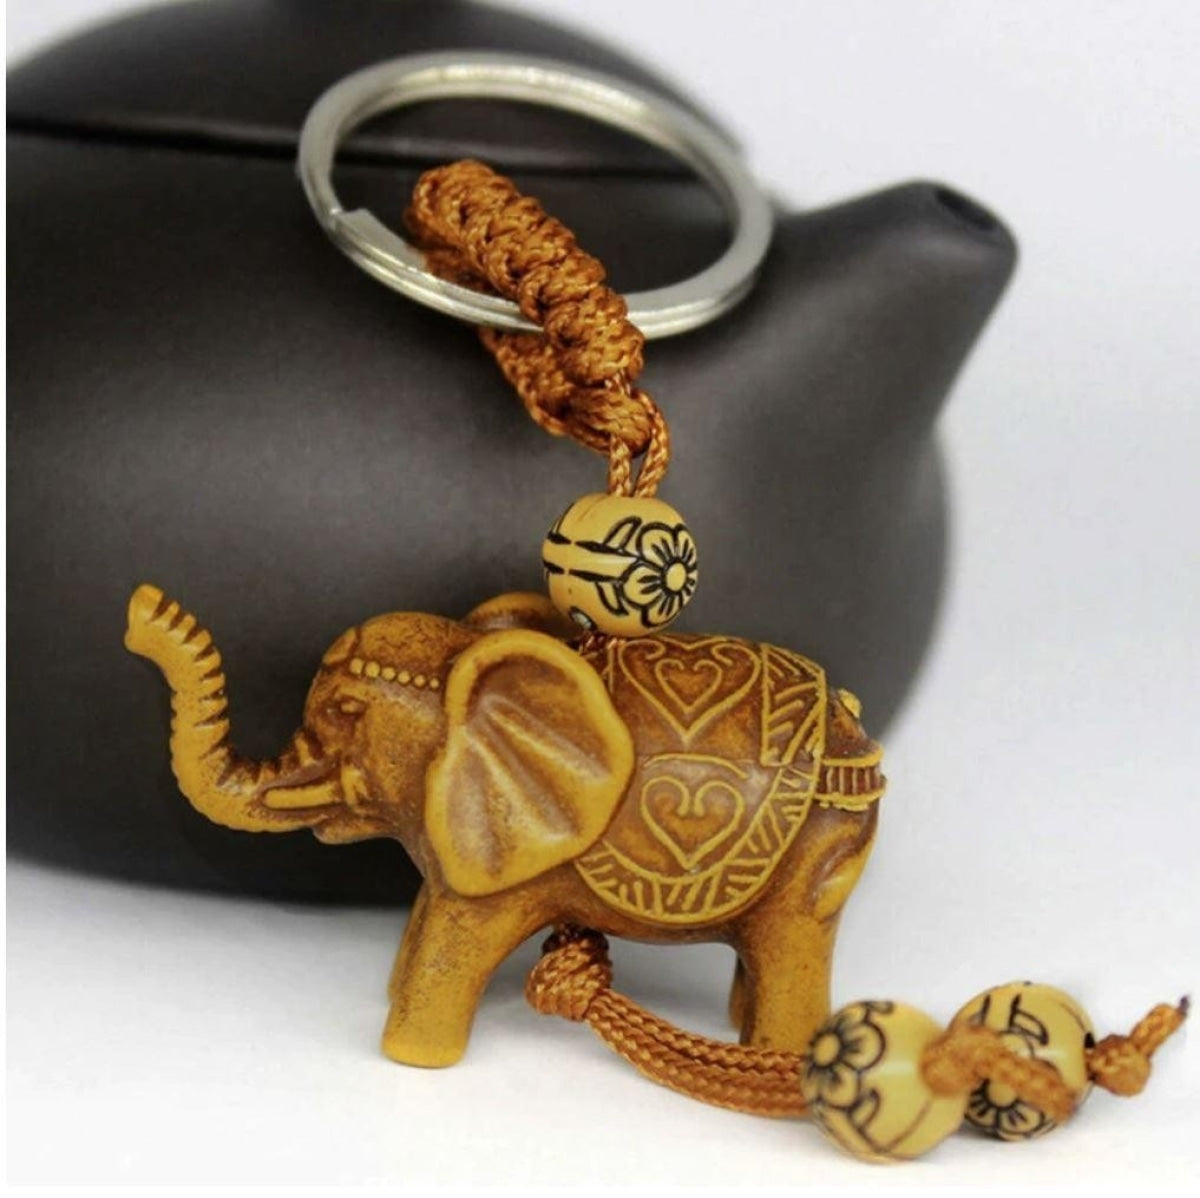 Elephant Keychain Peach Wood Carving Unique Key Chain To Give Gifts Pom Cute Stainless Steel